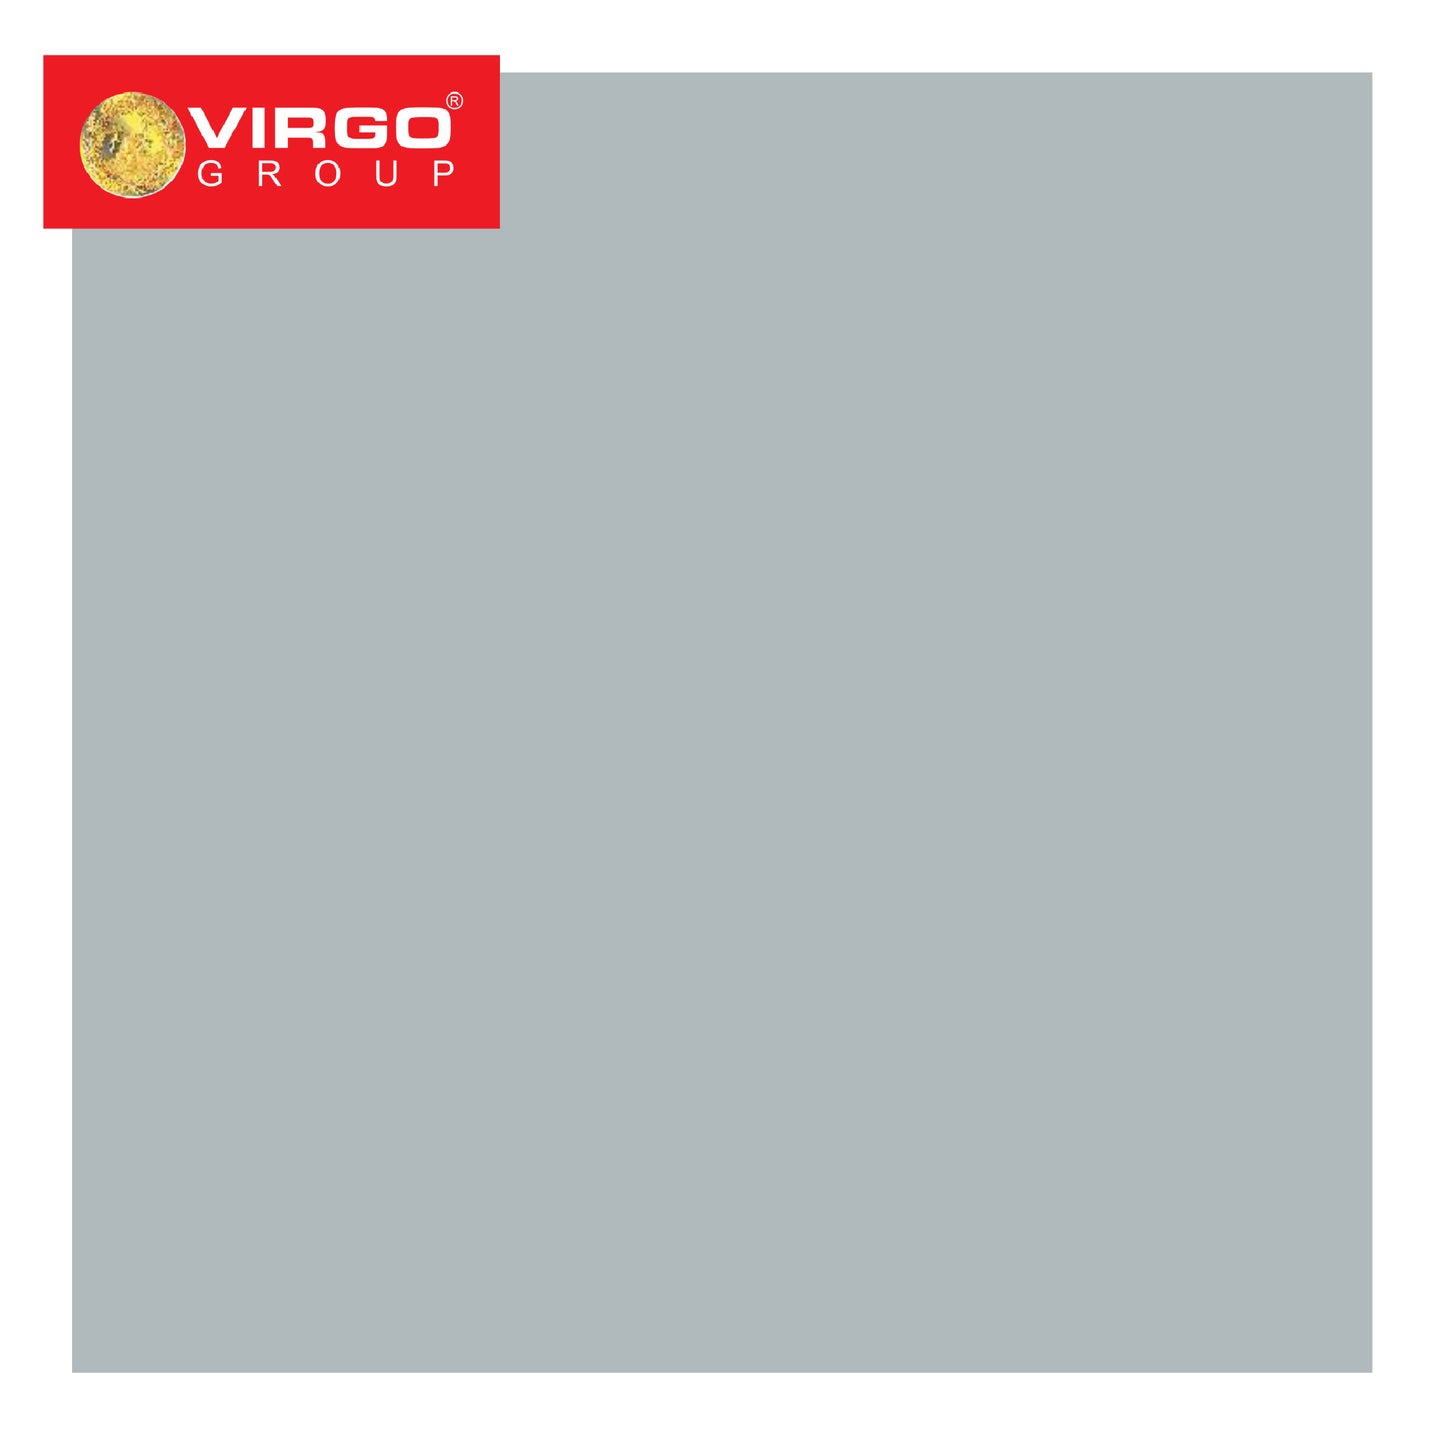 Virgo Plain Decorative Laminates Without Barrier Paper Size 2440x1220mm - 0.8mm Thickness - (Full & Up) - 1001-Standard-Suedu